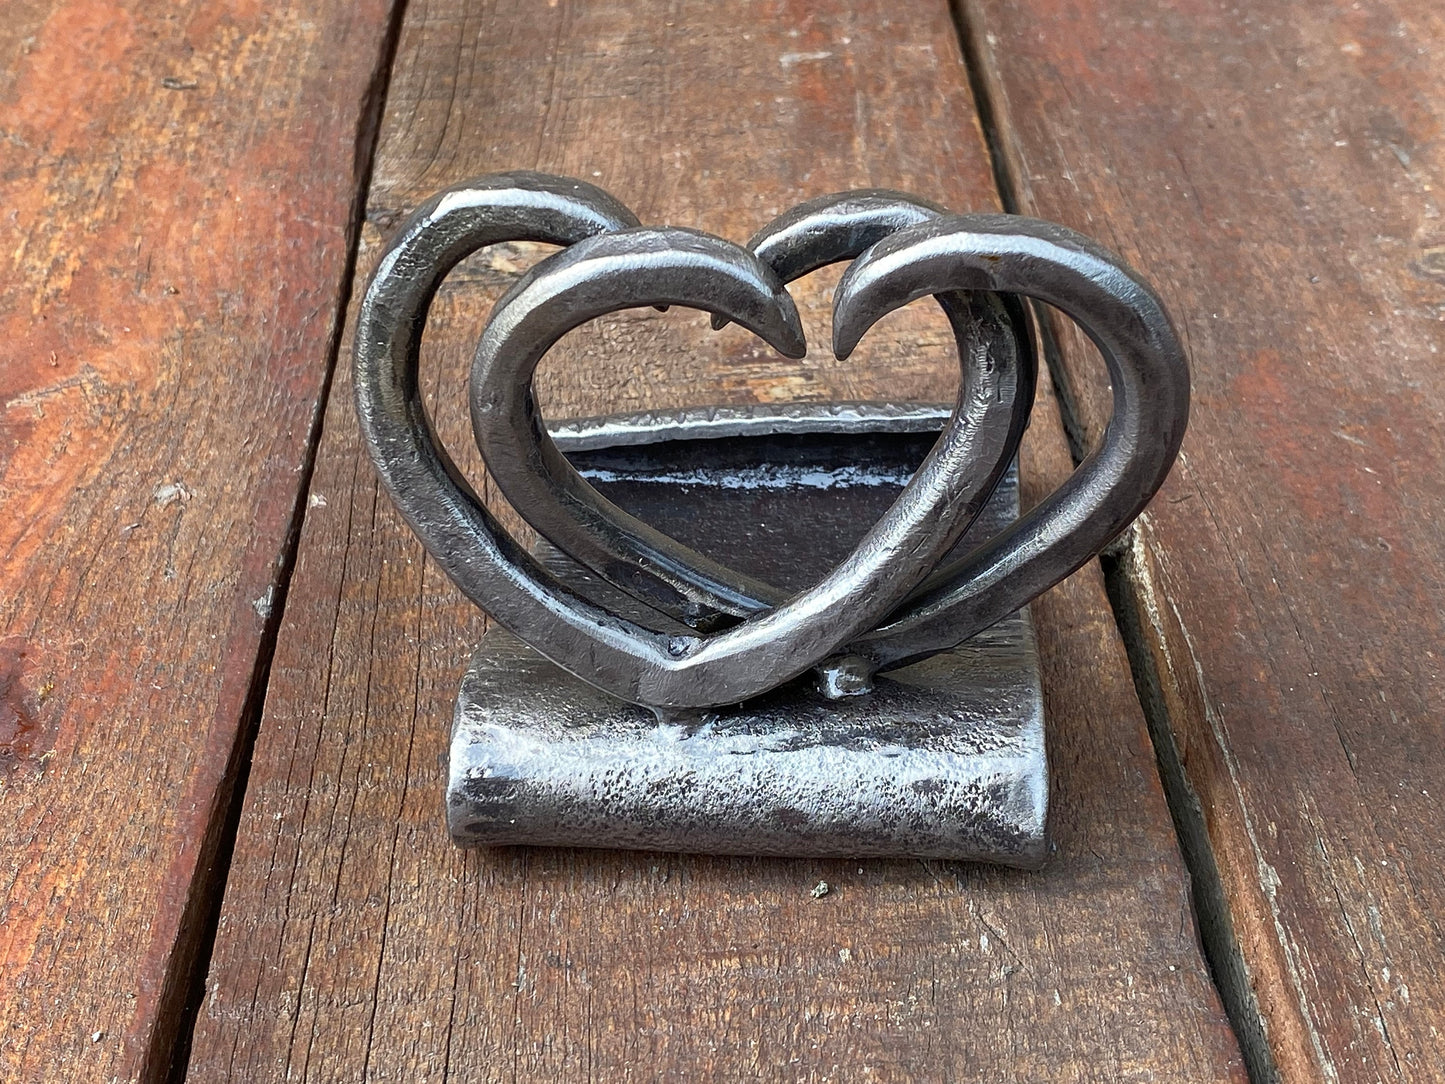 6th anniversary, personalized iron gift, hearts, scroll, iron gift, 6 year anniversary, engraved iron gift,iron scroll,iron anniversary gift